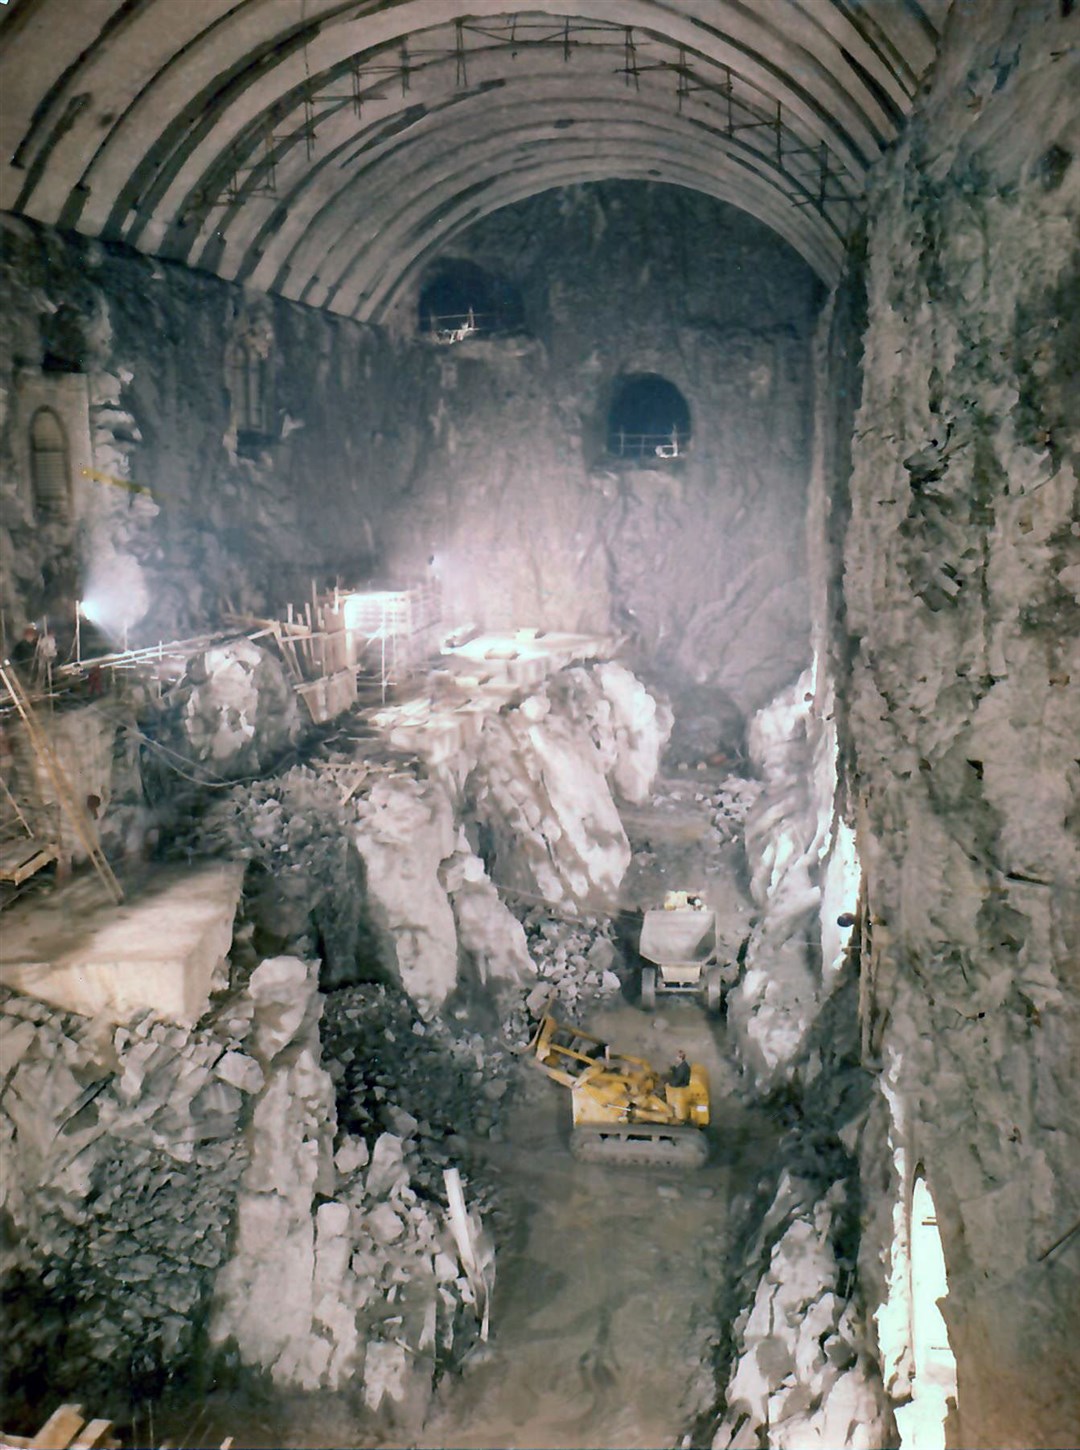 Inside one of the chambers in the Foyers hydro scheme which was excavated as part of the project that was finished in 1975. Picture supplied by John Davidson